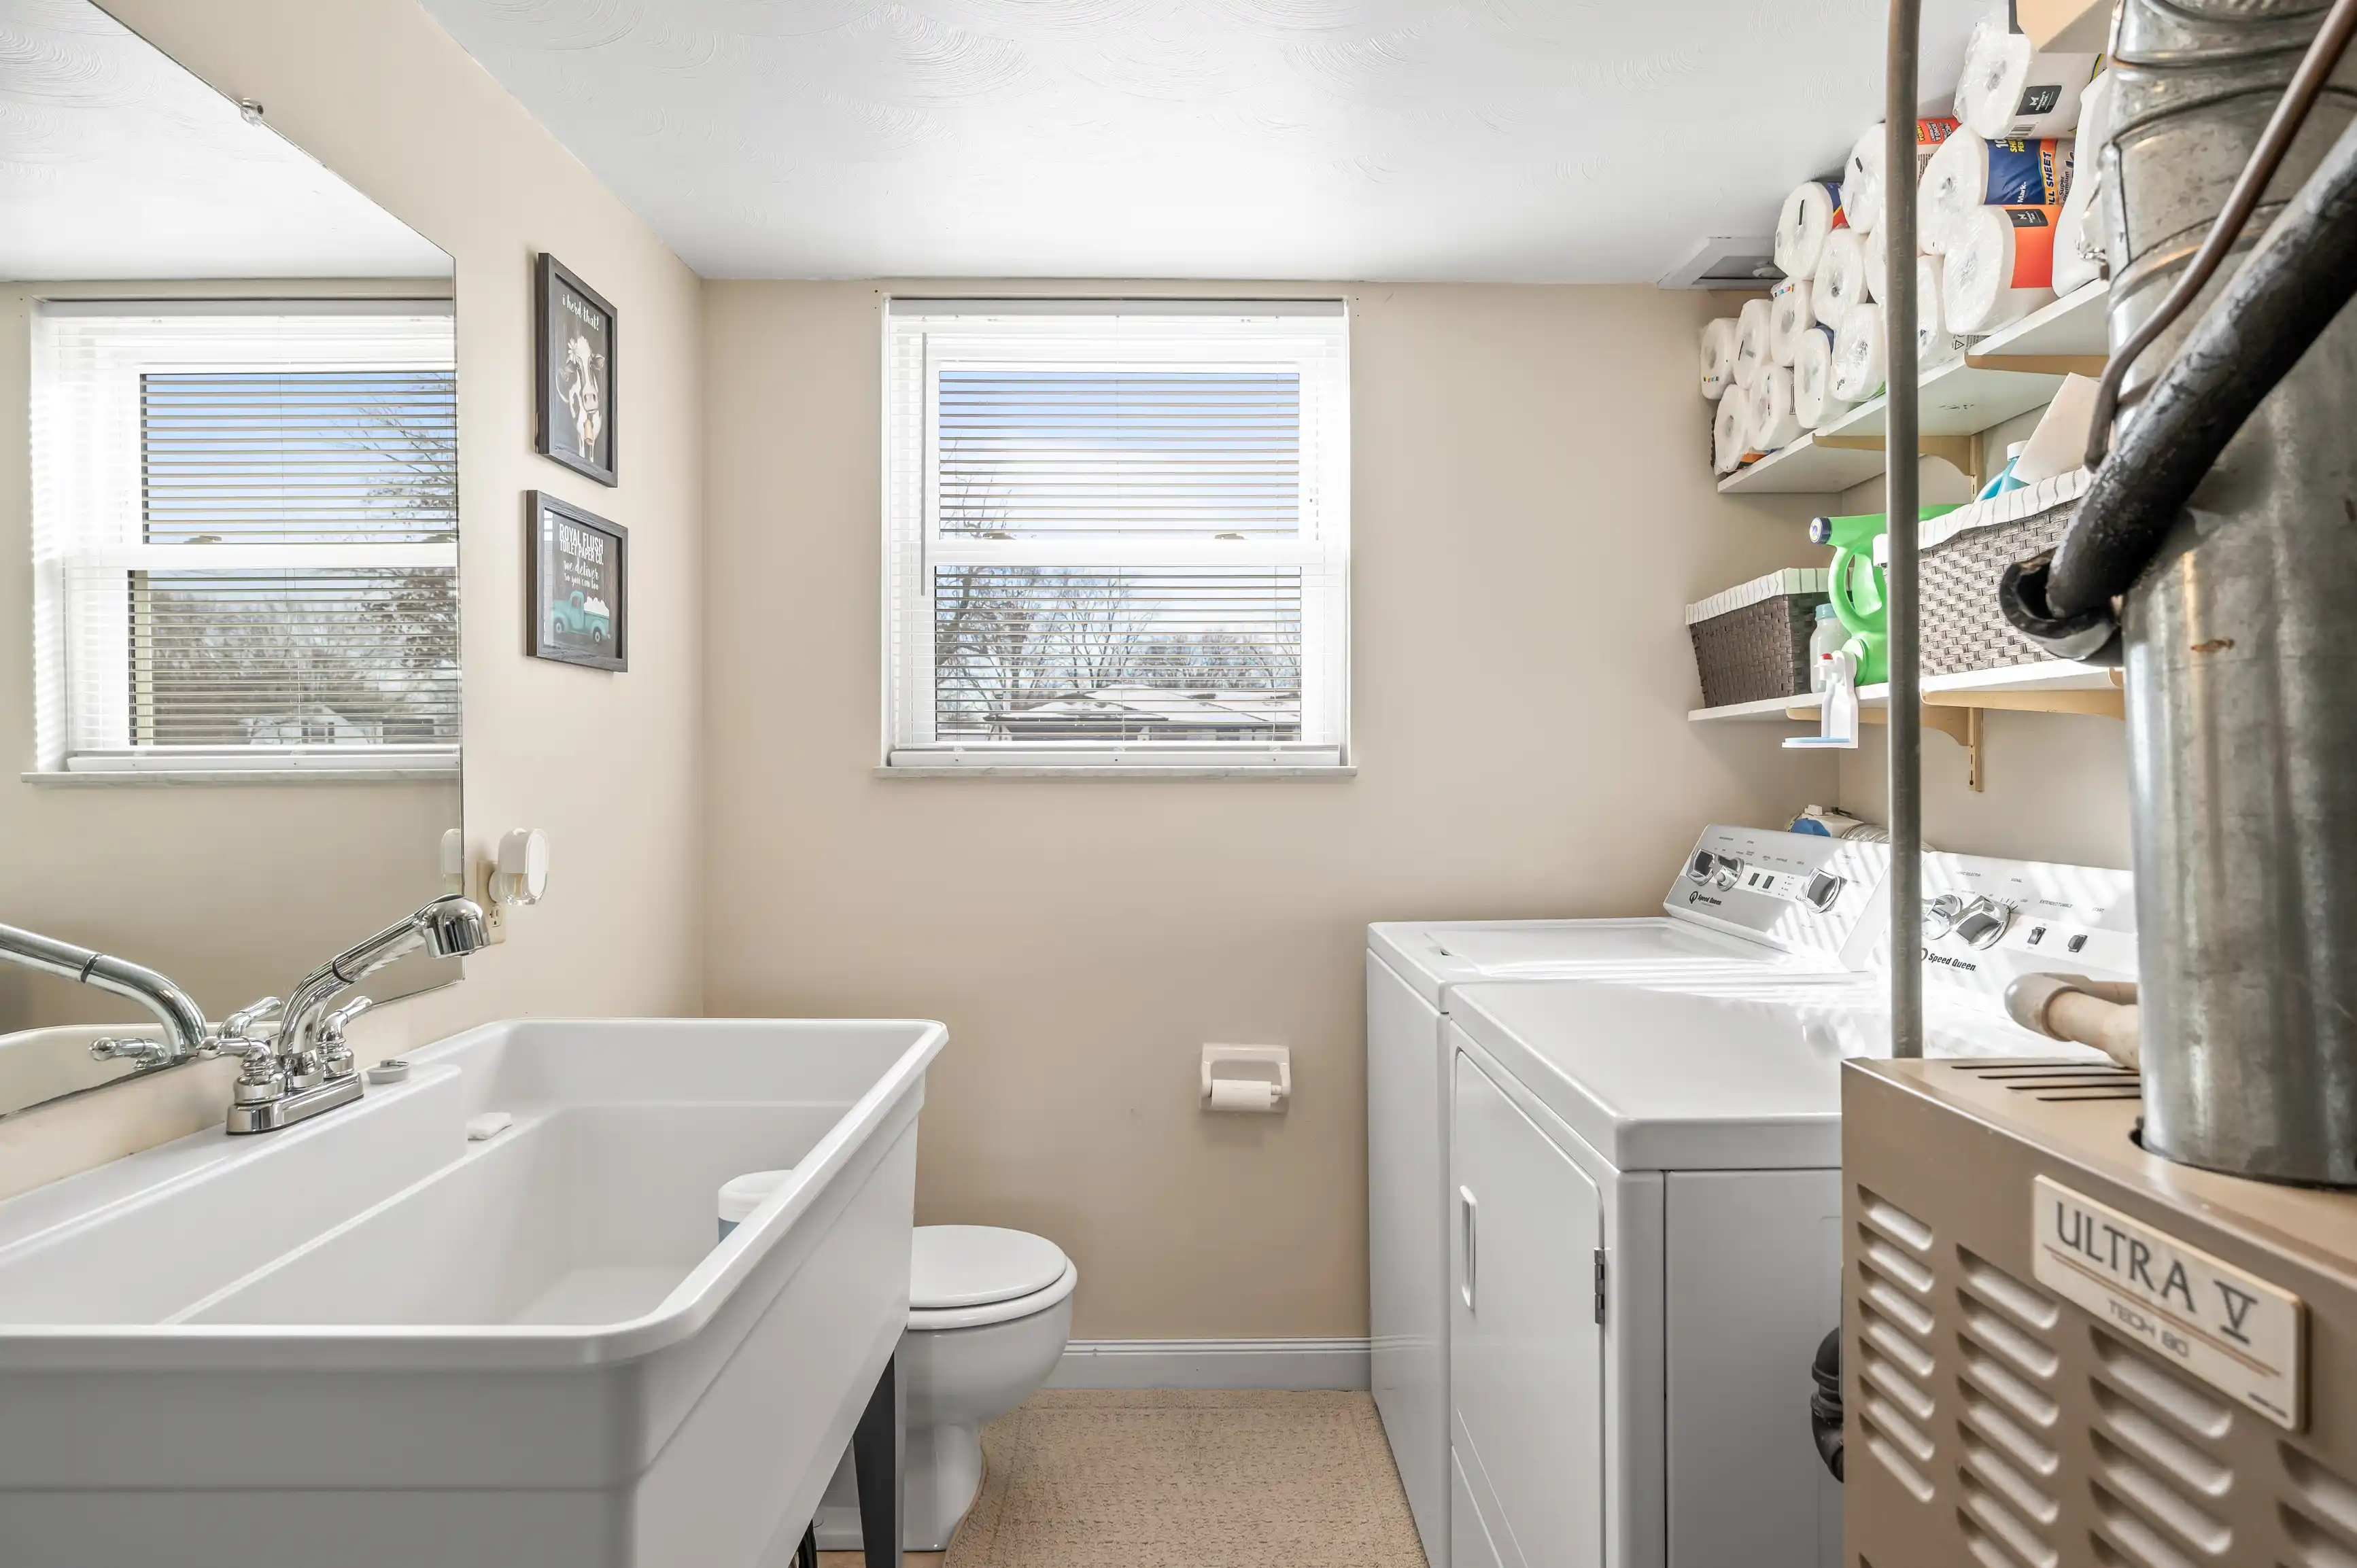 A bright laundry room with a utility sink, washing machine, dryer, and toilet, with natural light coming in through two windows.